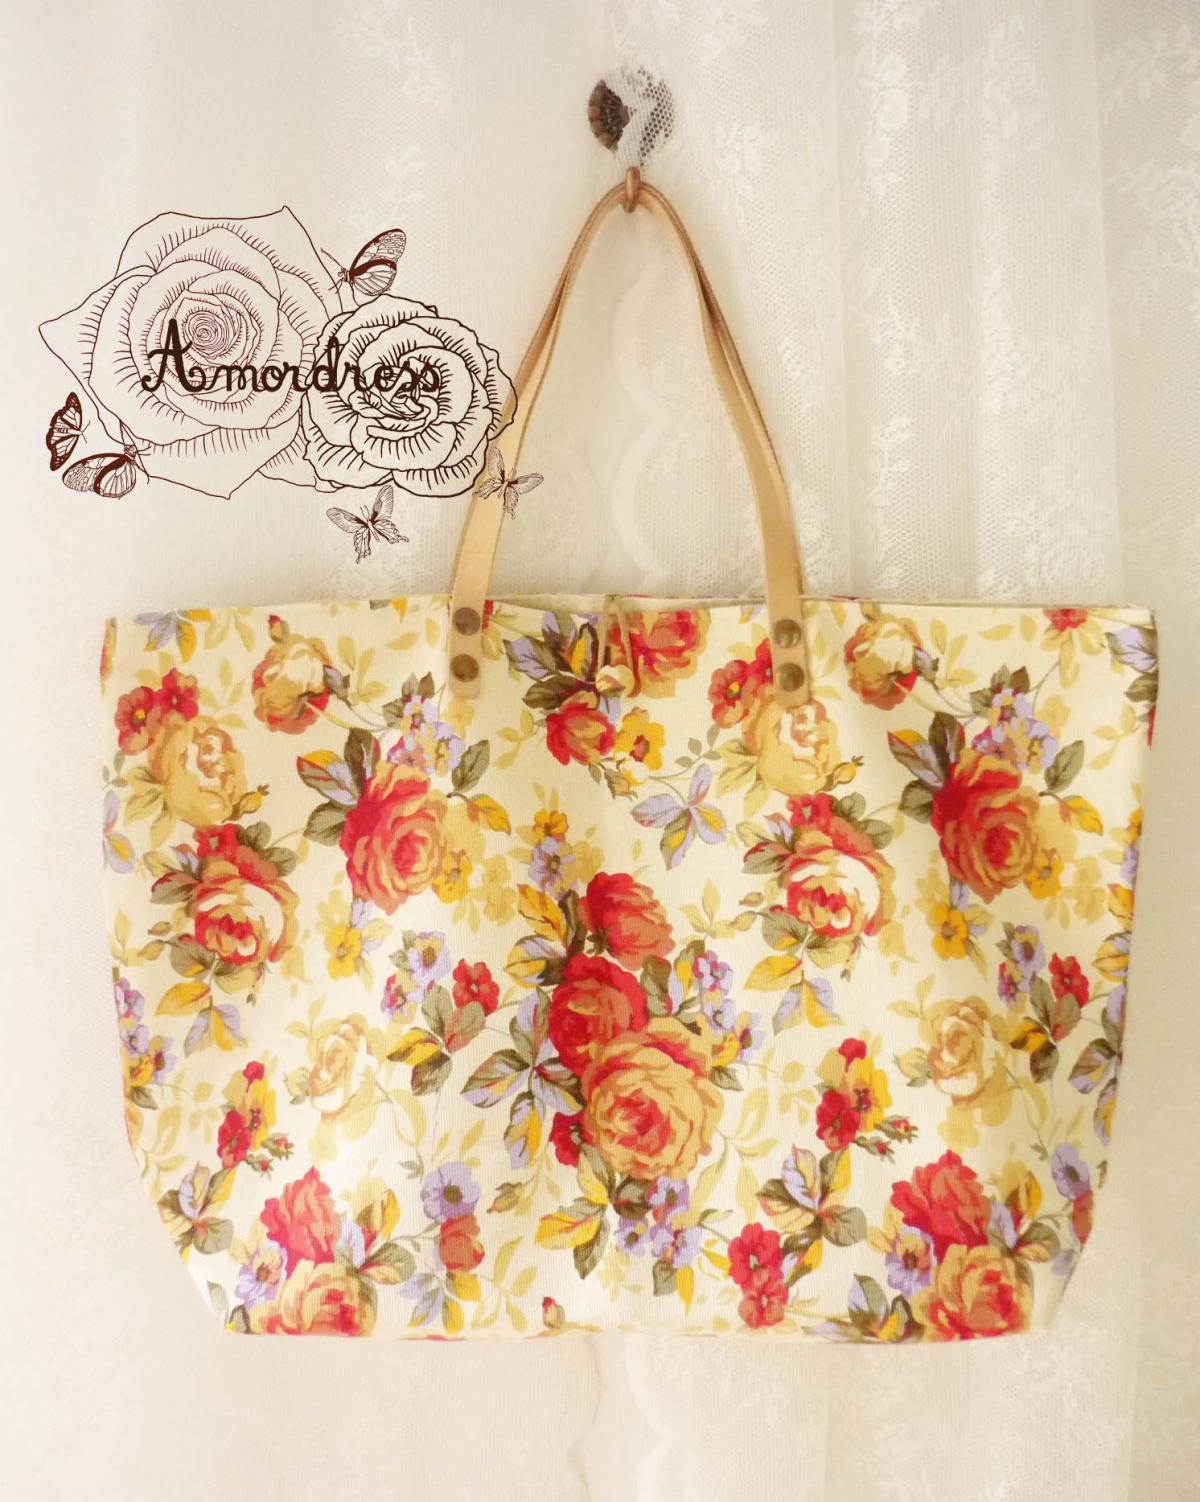 Floral Tote Bag Printed Canvas Bag Genuine Leather Strap Cream Tangerine Floral Garden Shabby Chic Bag ...Amor The Inspired Collection...